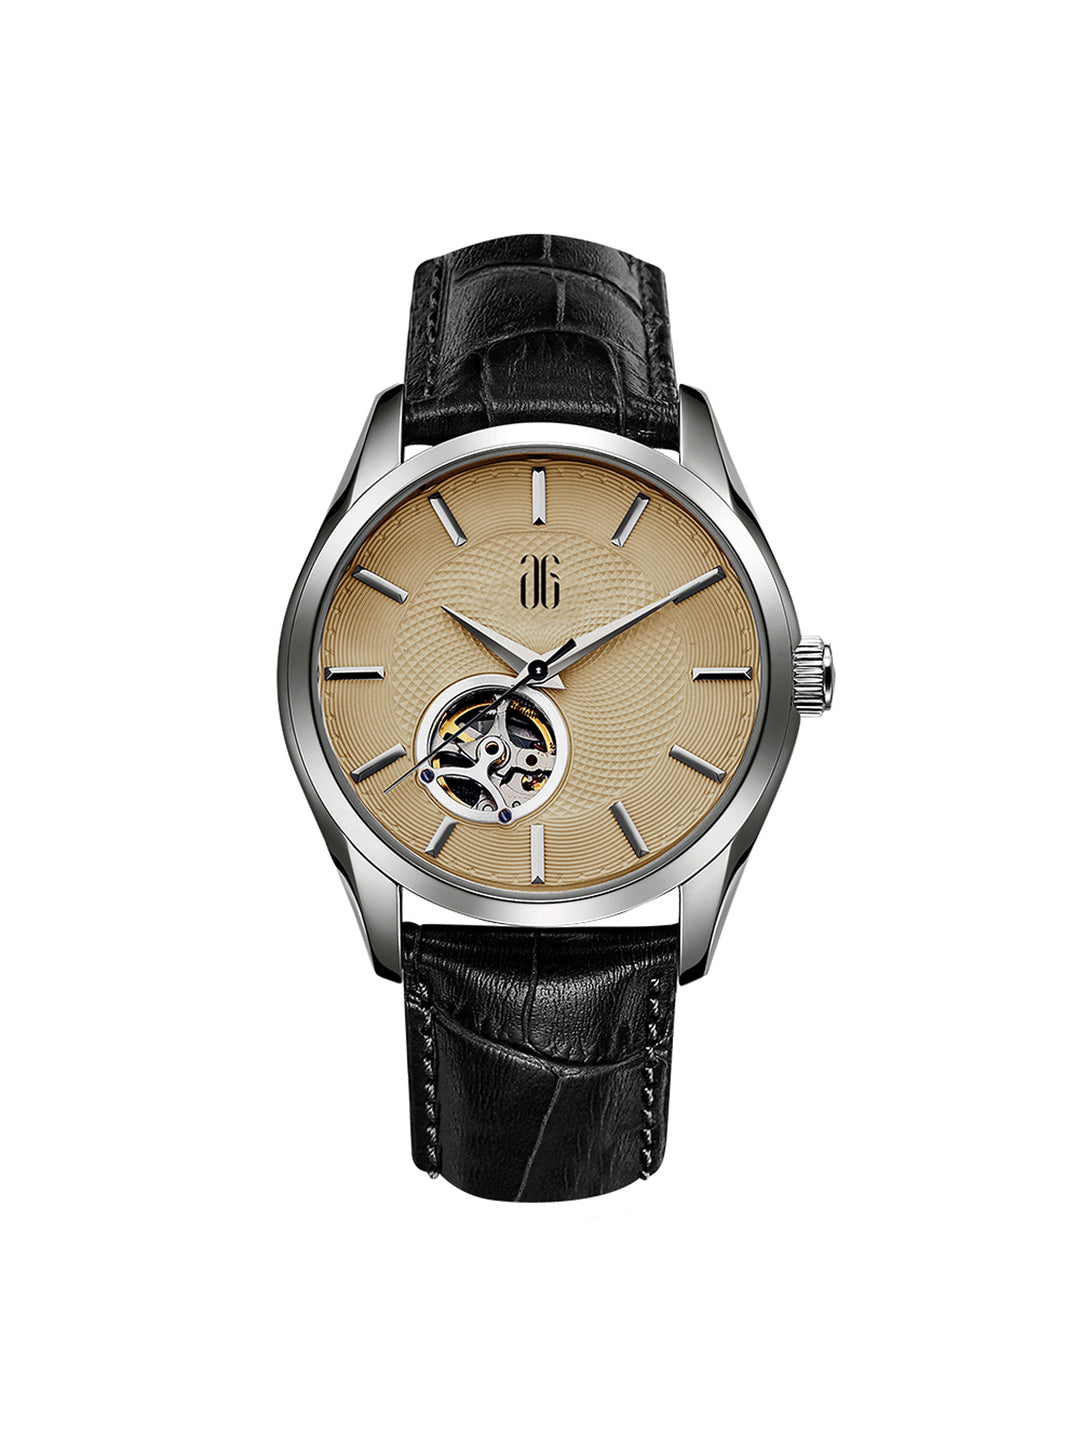 The Goldex Automatic Men's Watch -  G 8022 S-BEI